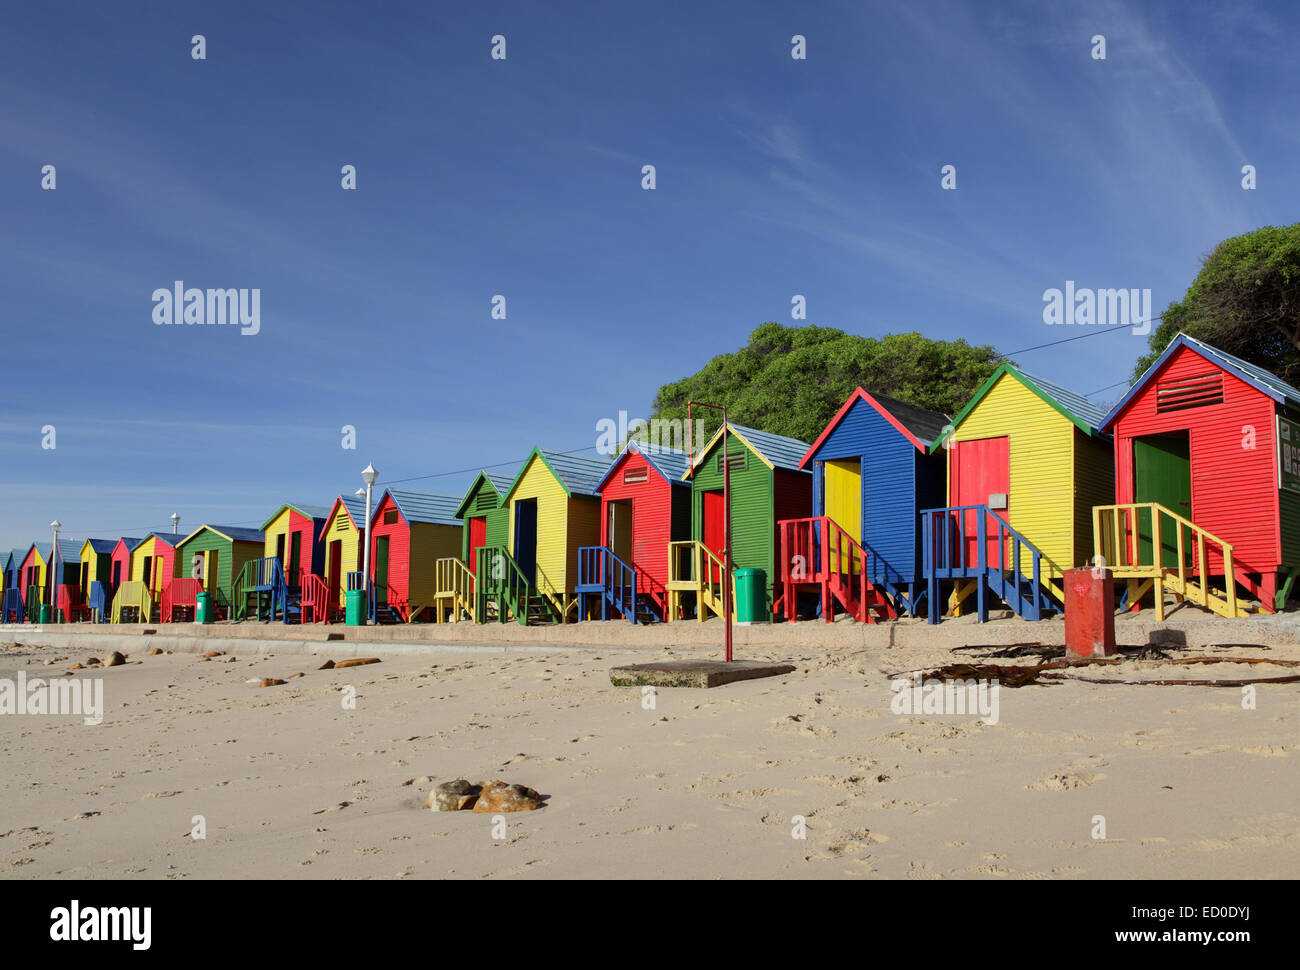 South Africa, Cape Town, St Jame's Beach, Muizenberg, Row of multi colored beach houses Stock Photo